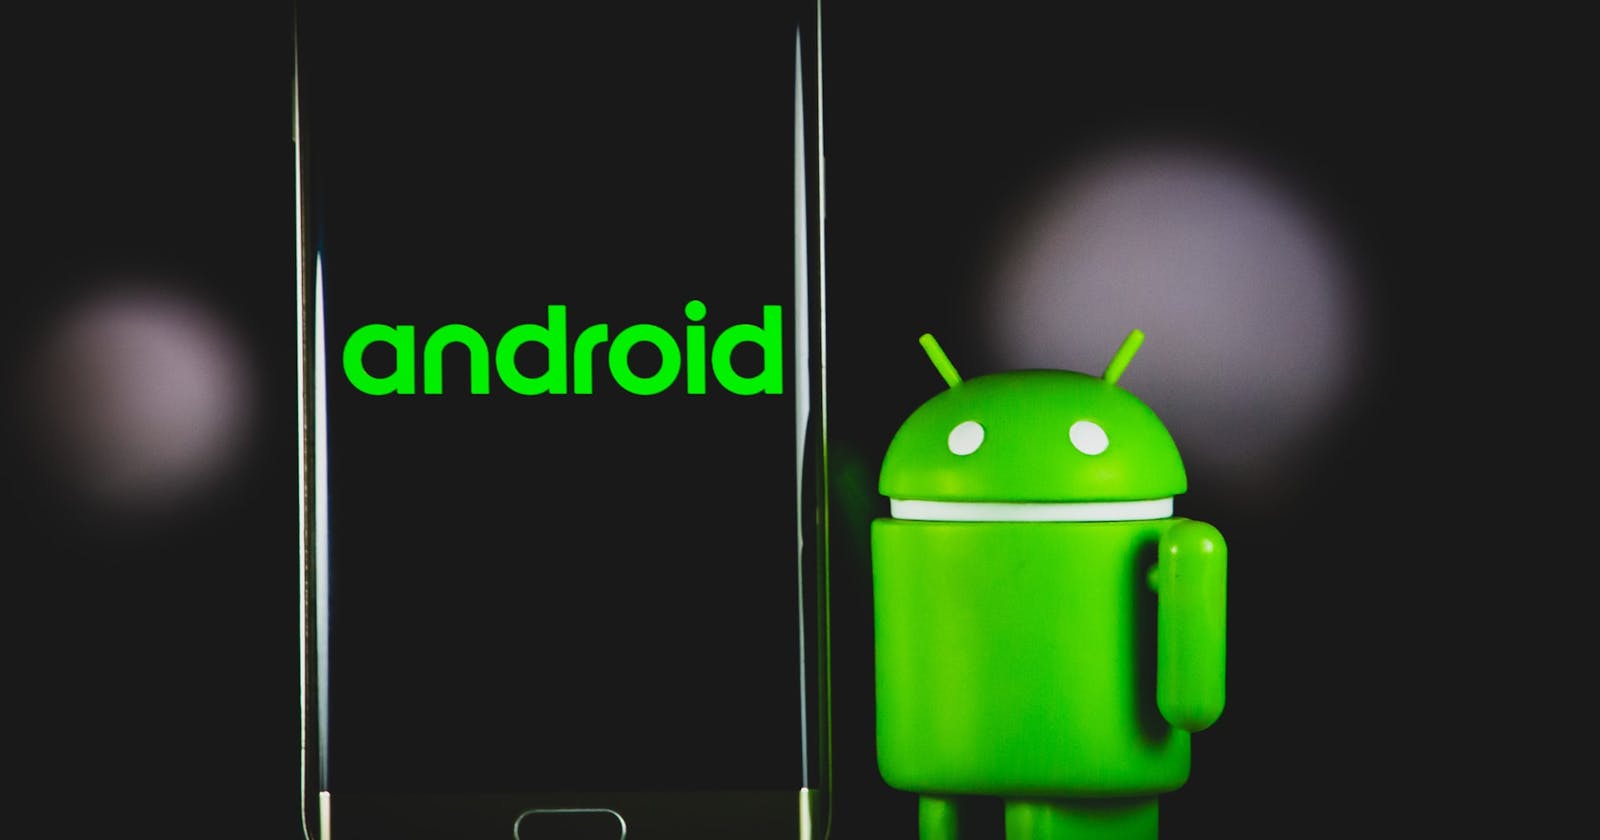 Free Resources To Get Started With Android Development